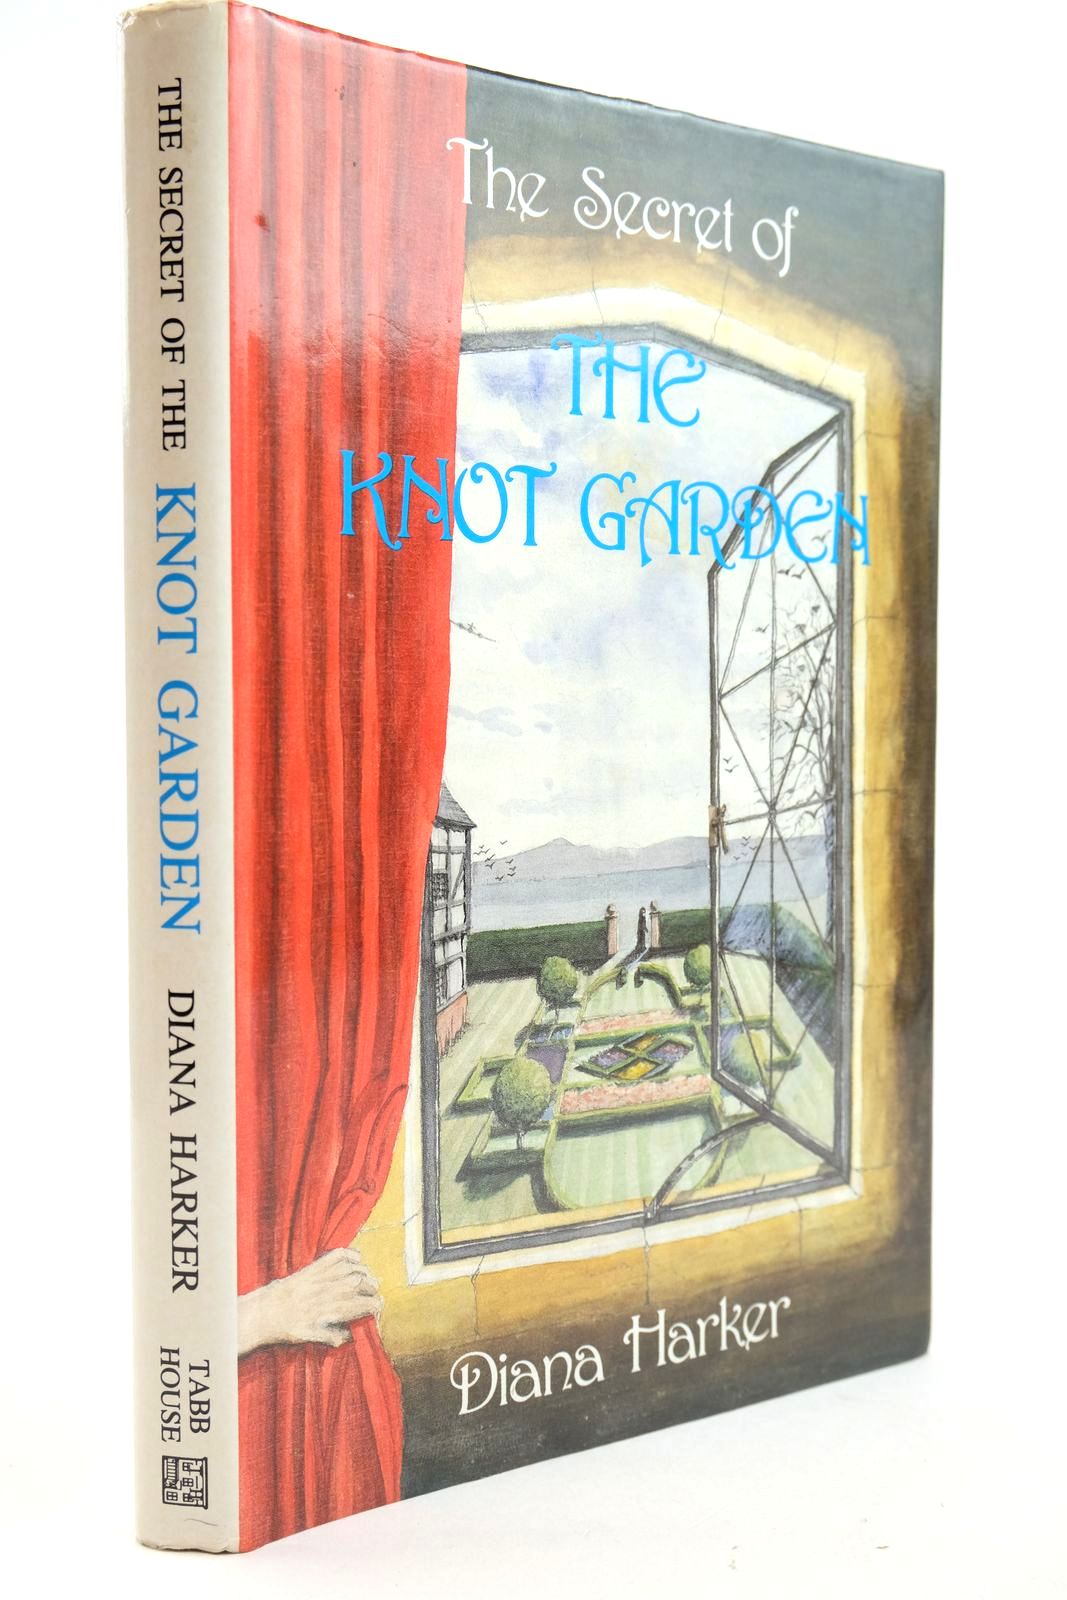 Photo of THE SECRET OF THE KNOT GARDEN written by Harker, Diana illustrated by Harker, Jonathan published by Tabb House (STOCK CODE: 2132991)  for sale by Stella & Rose's Books